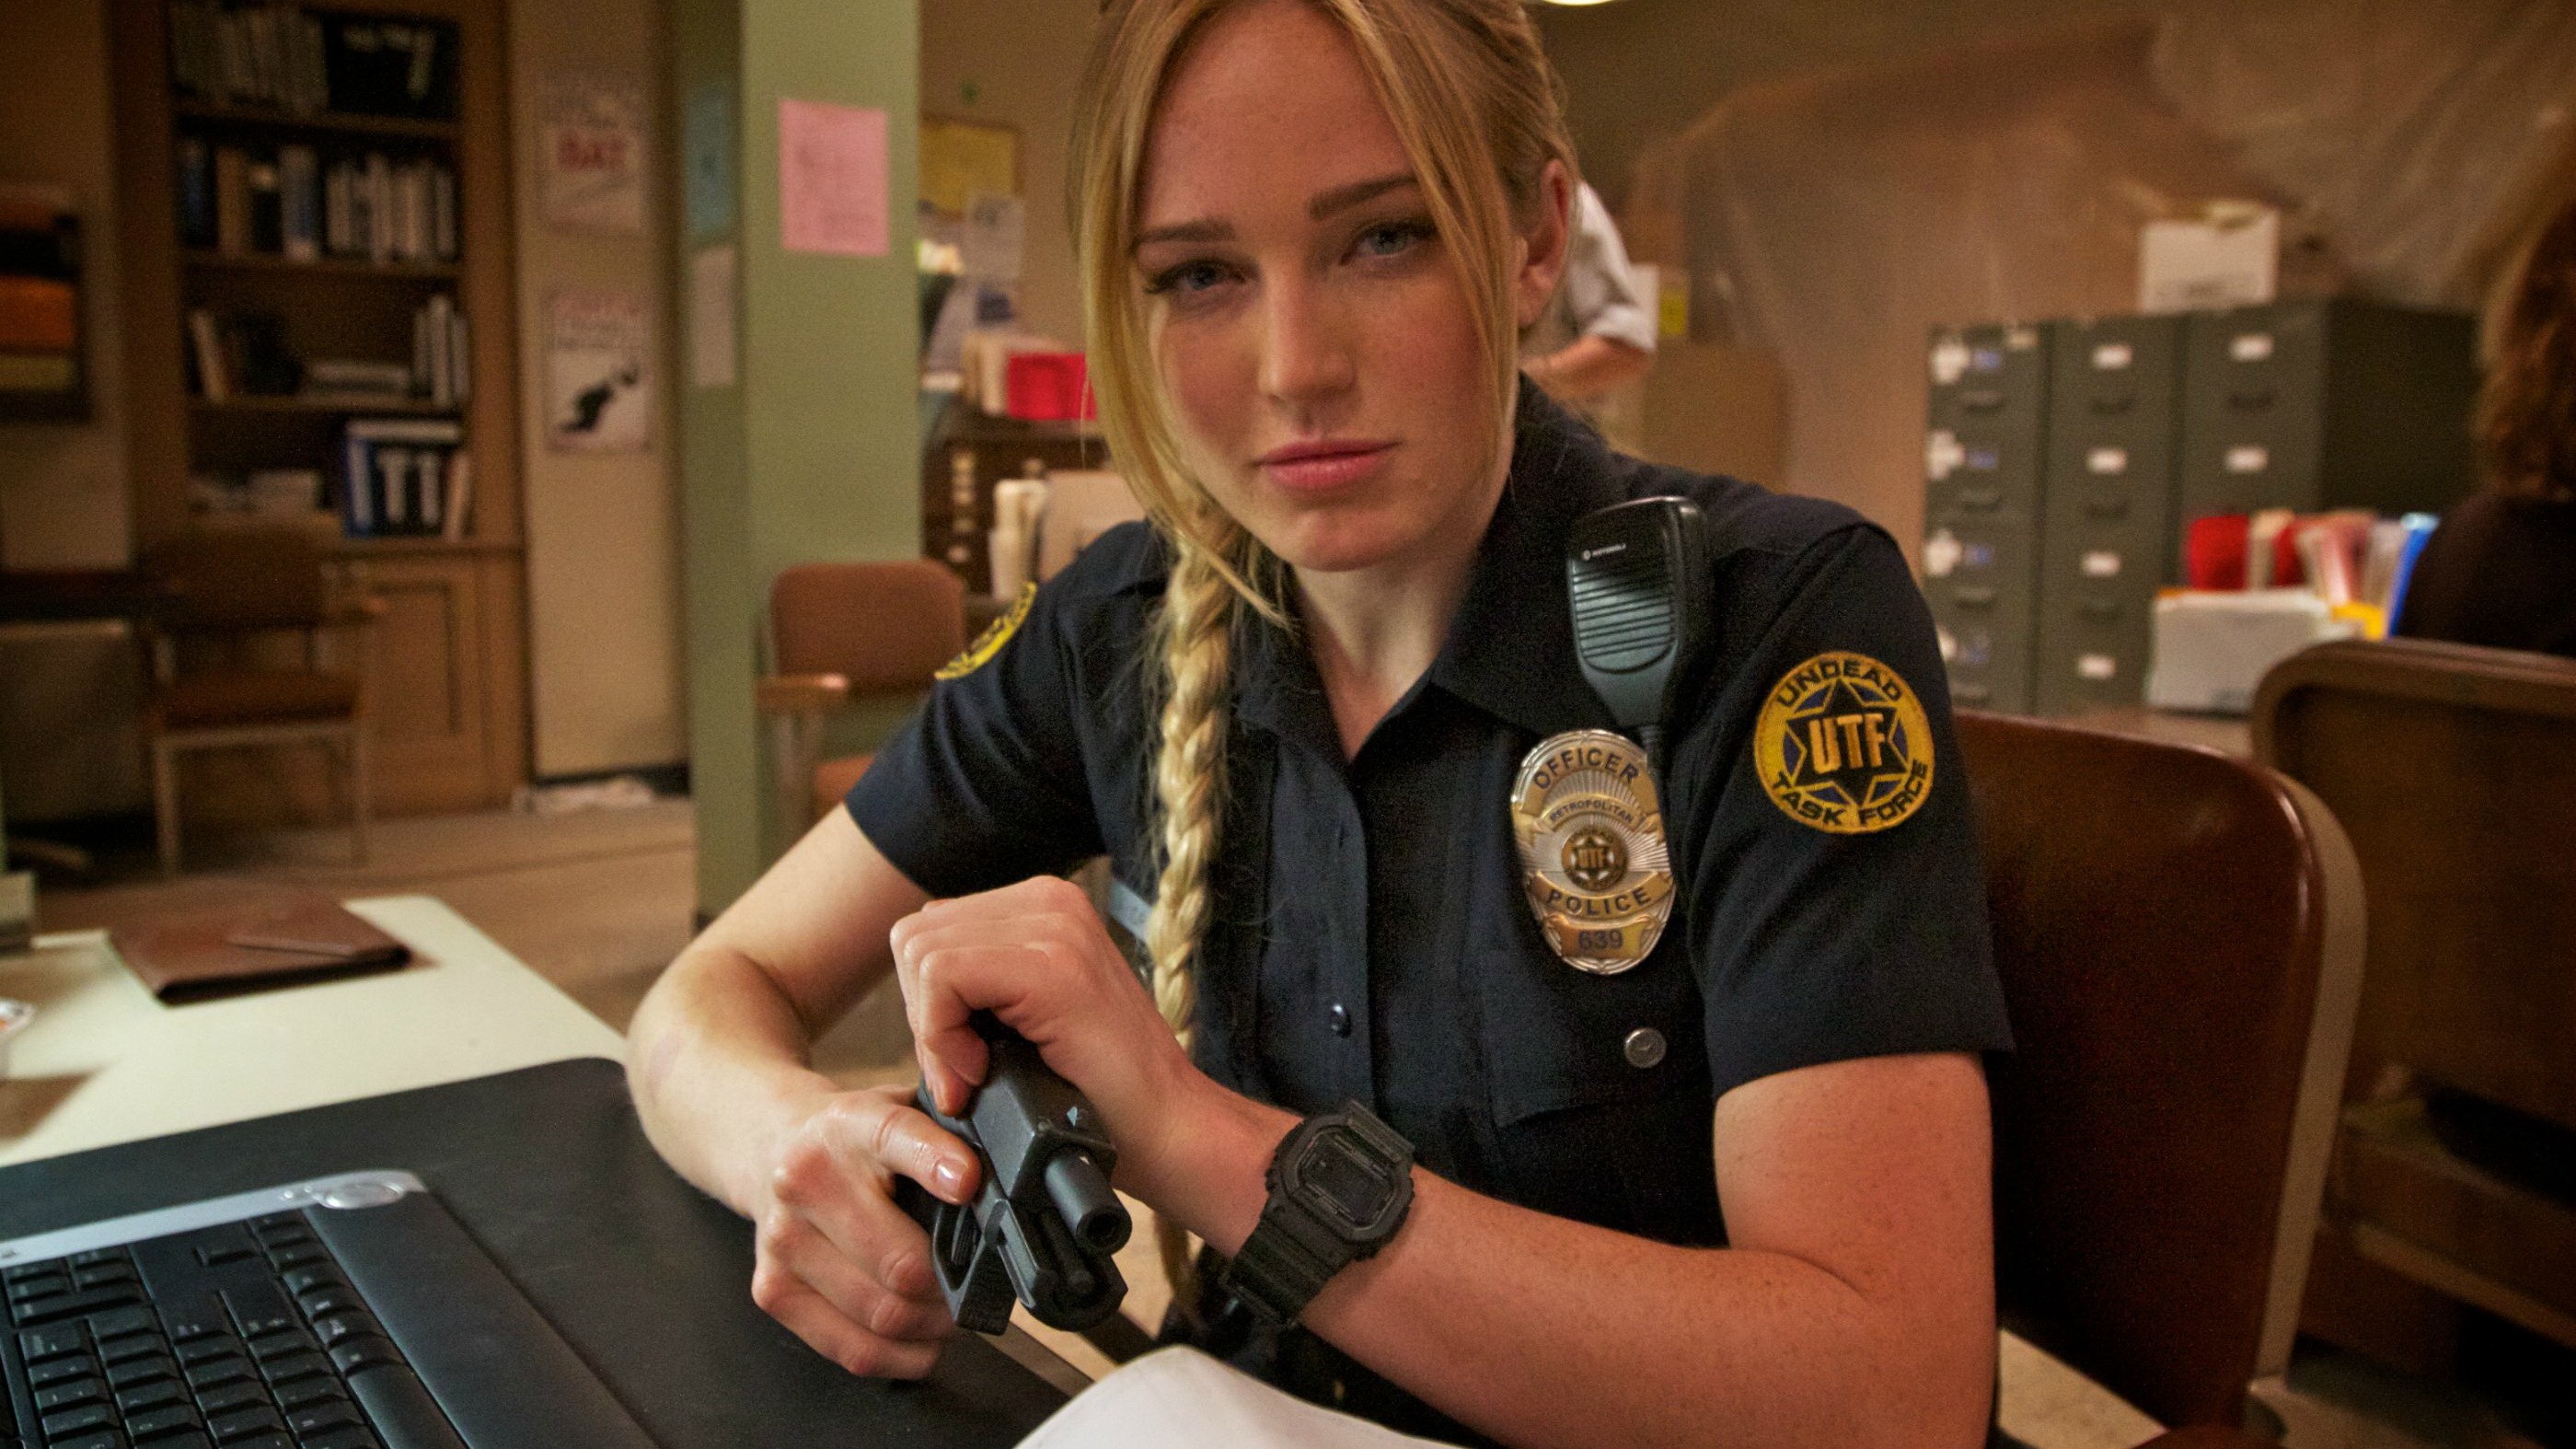 Caity Lotz Wallpapers